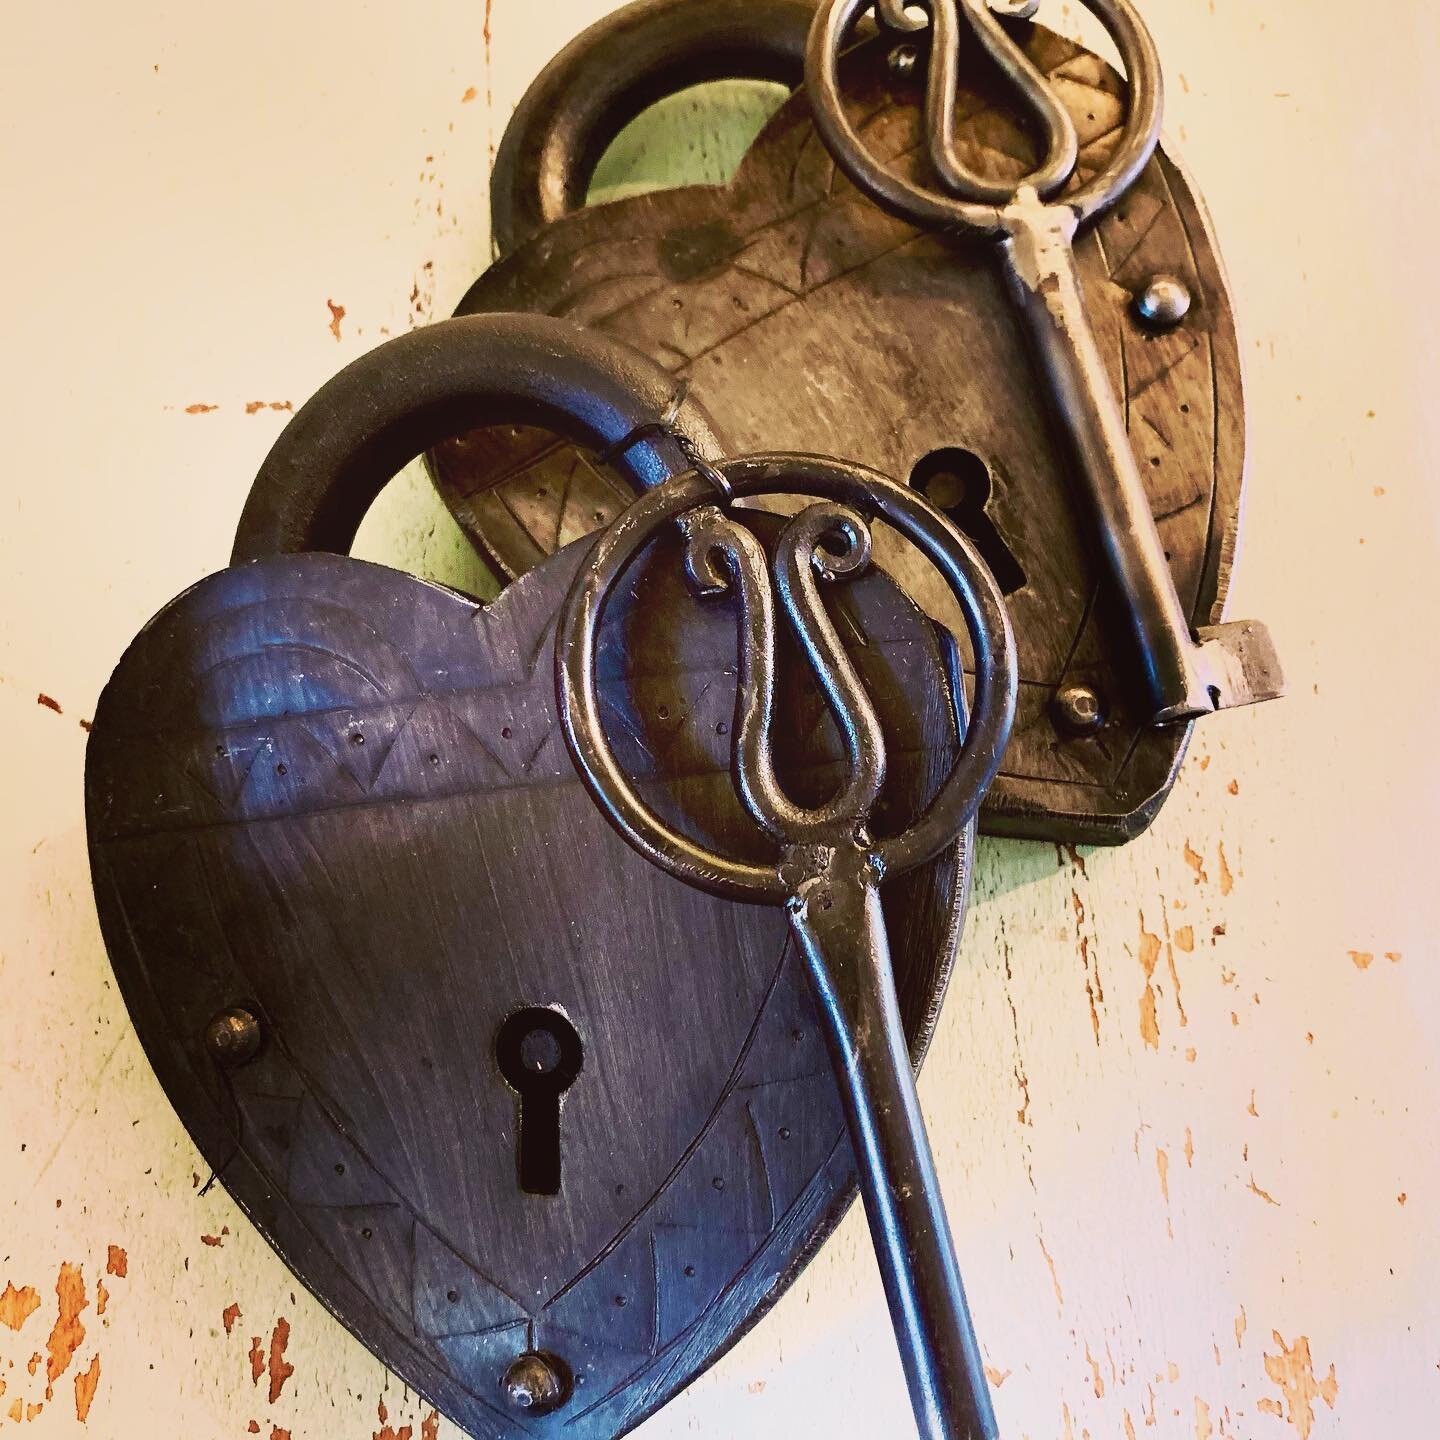 Did someone say paperweight? Iron locks of Love. Yes we work! ❤️#greatgifts #giftideas #valentineideas #homeaccessories #malegiftideas #shoplocal  #goodvibes